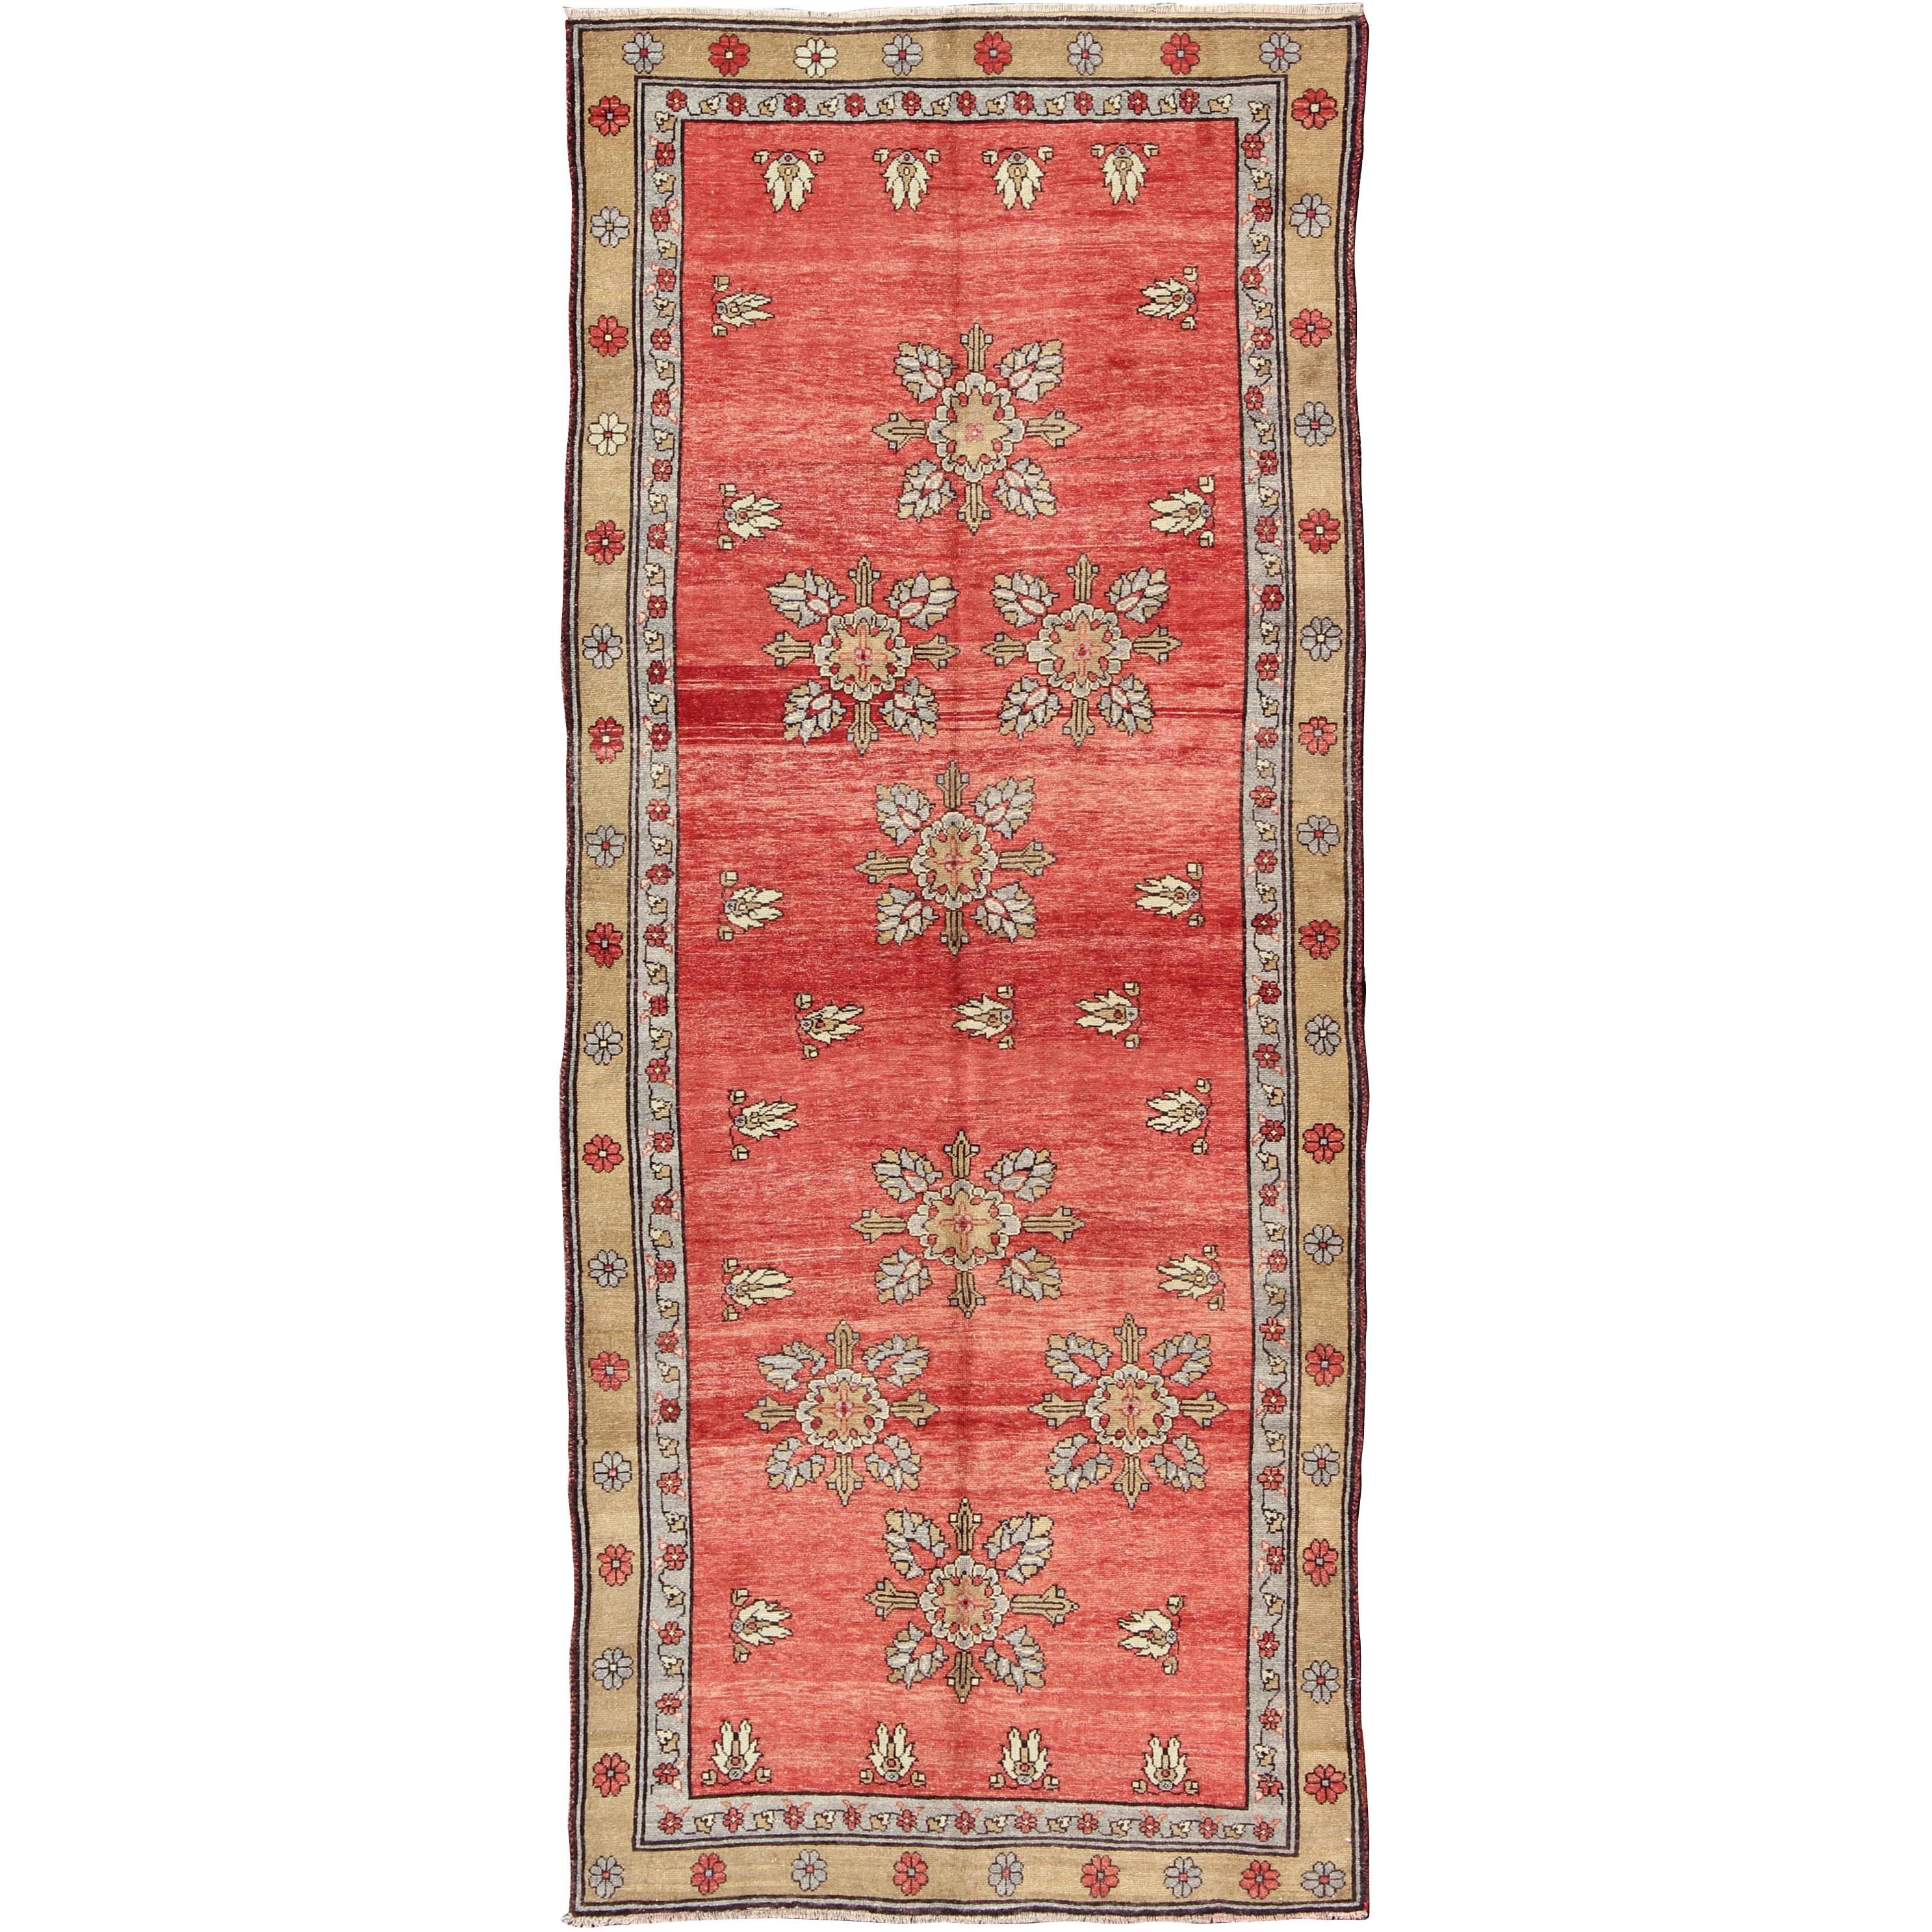 Vintage Turkish Oushak Carpet with Flowers in the Central Field and Borders